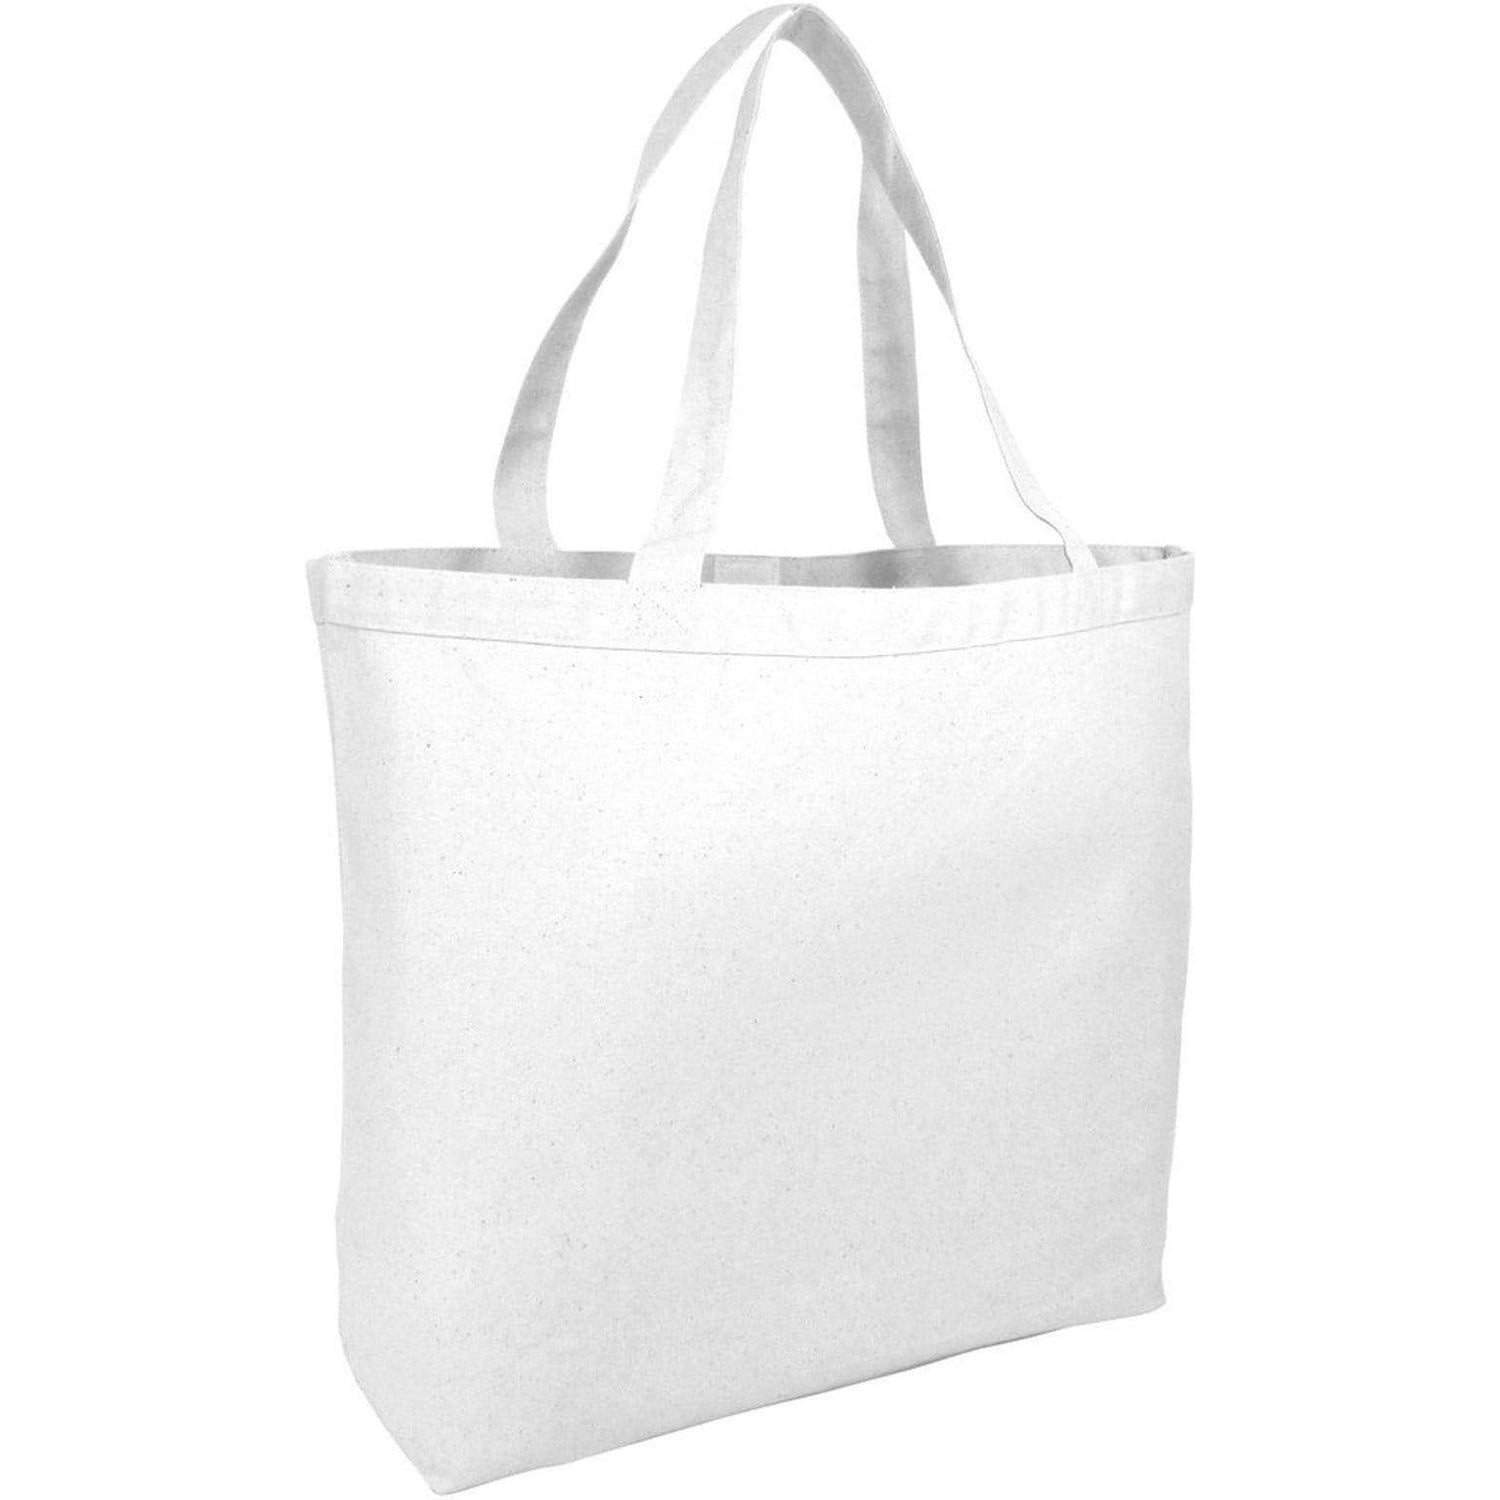 Large Canvas Tote Bags with Hook and Loop Closure - 12 Pack Large Canvas Totes – BagzDepot™